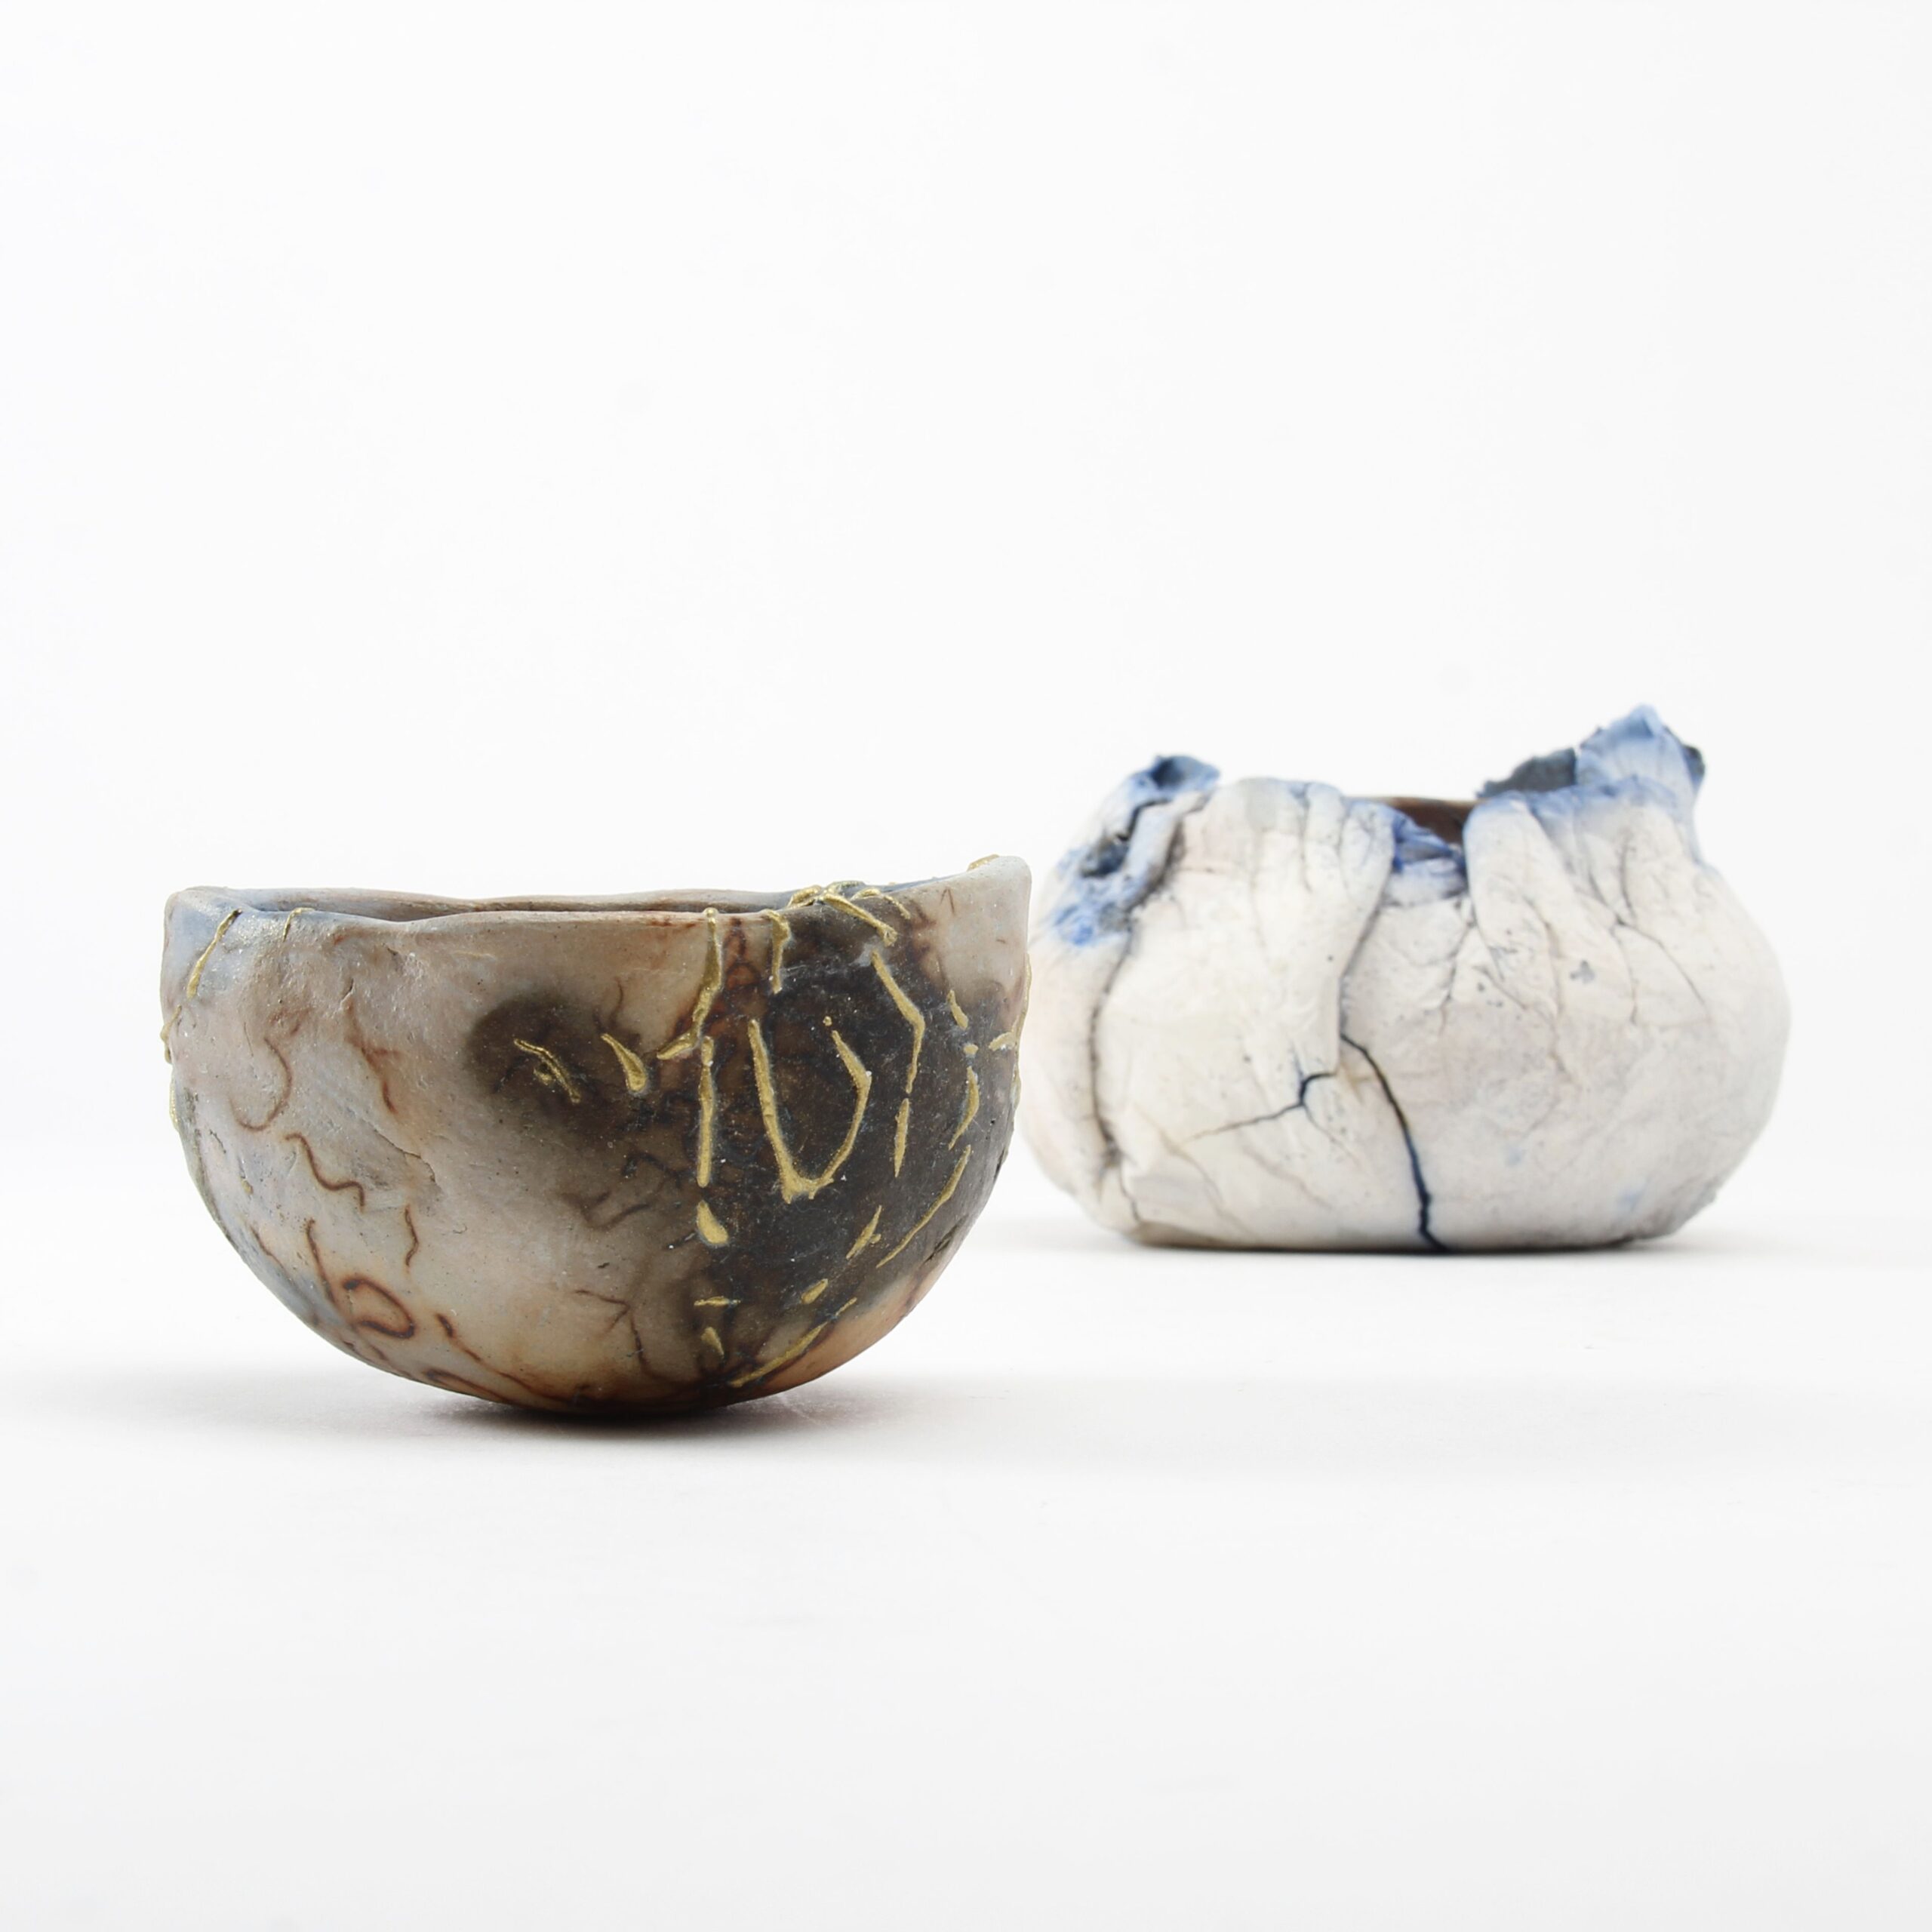 Alison Brannen: Saggar Cup Product Image 4 of 5